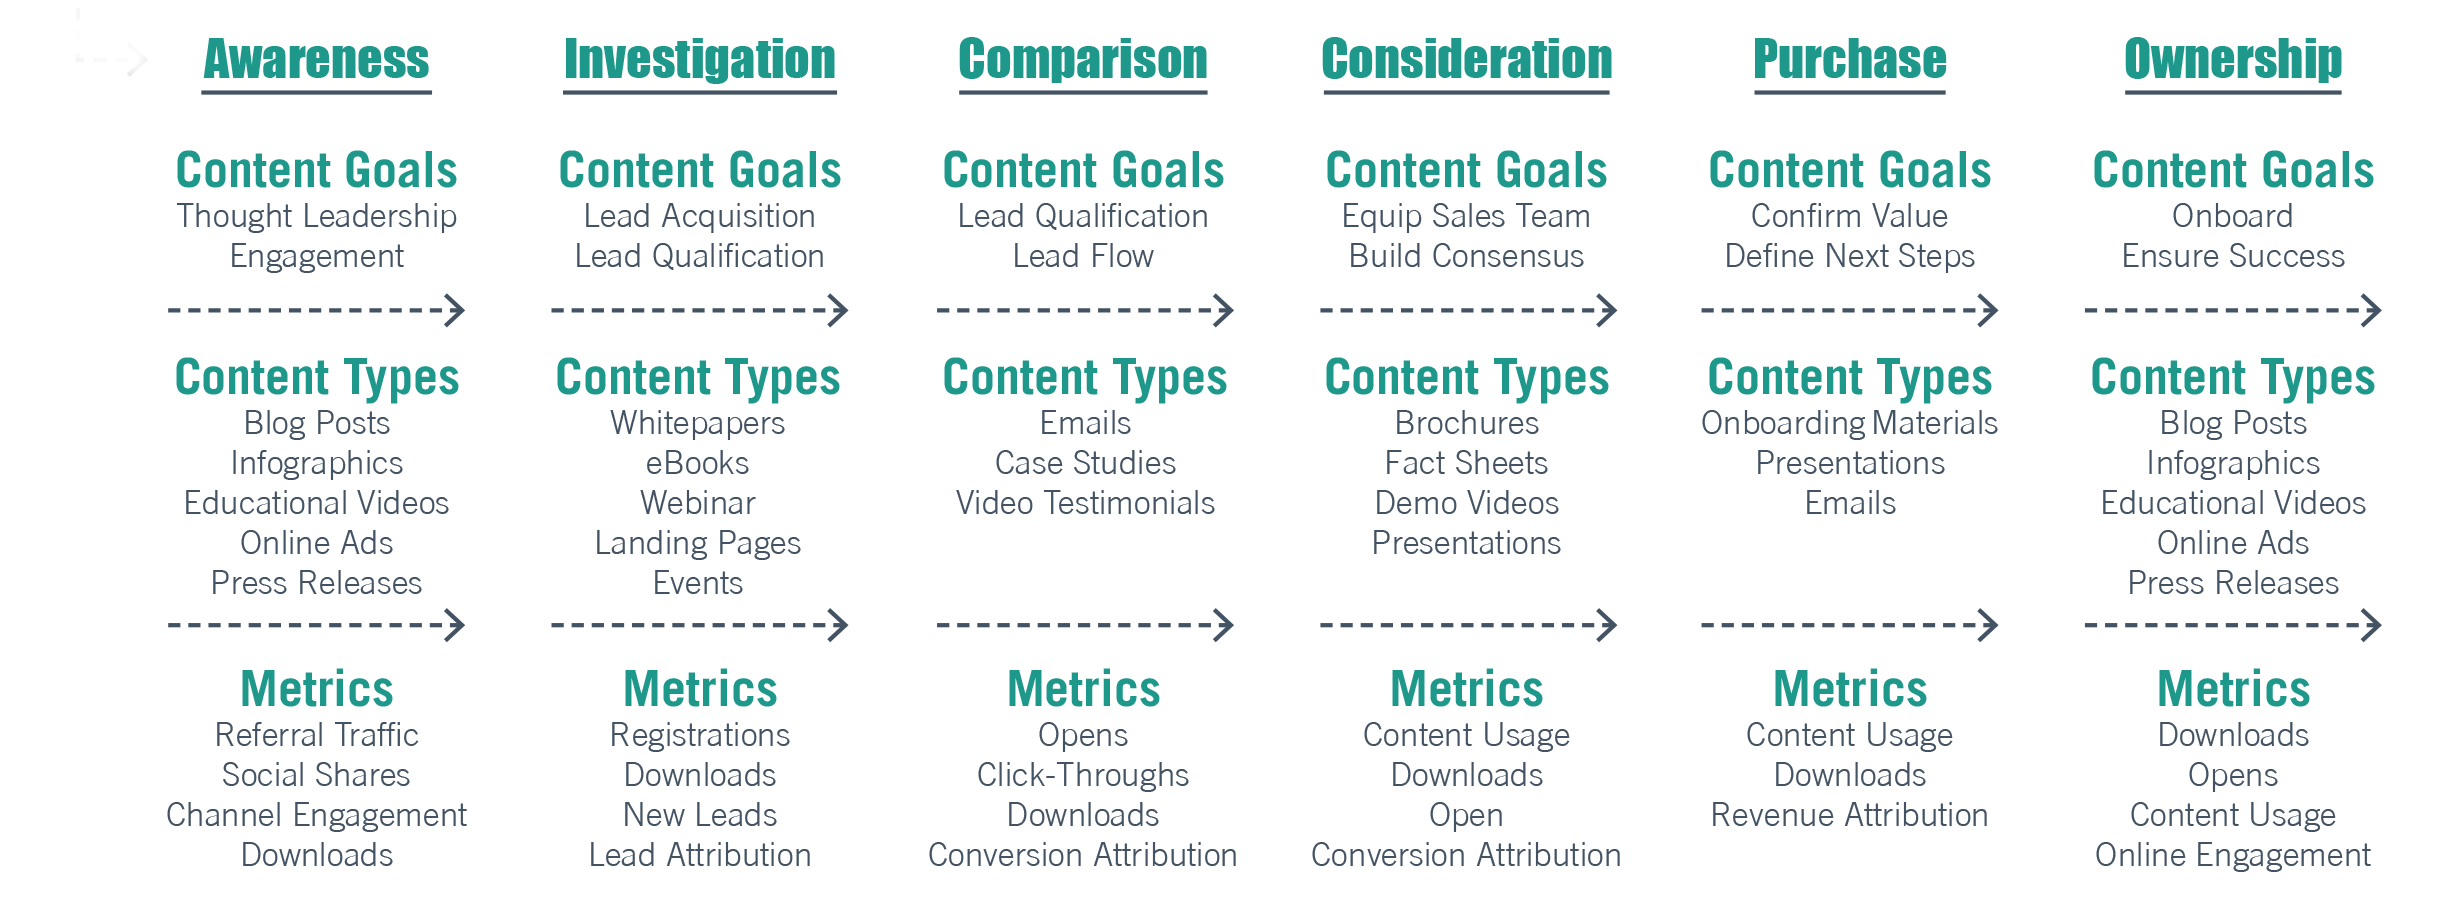 What are content marketing methods?